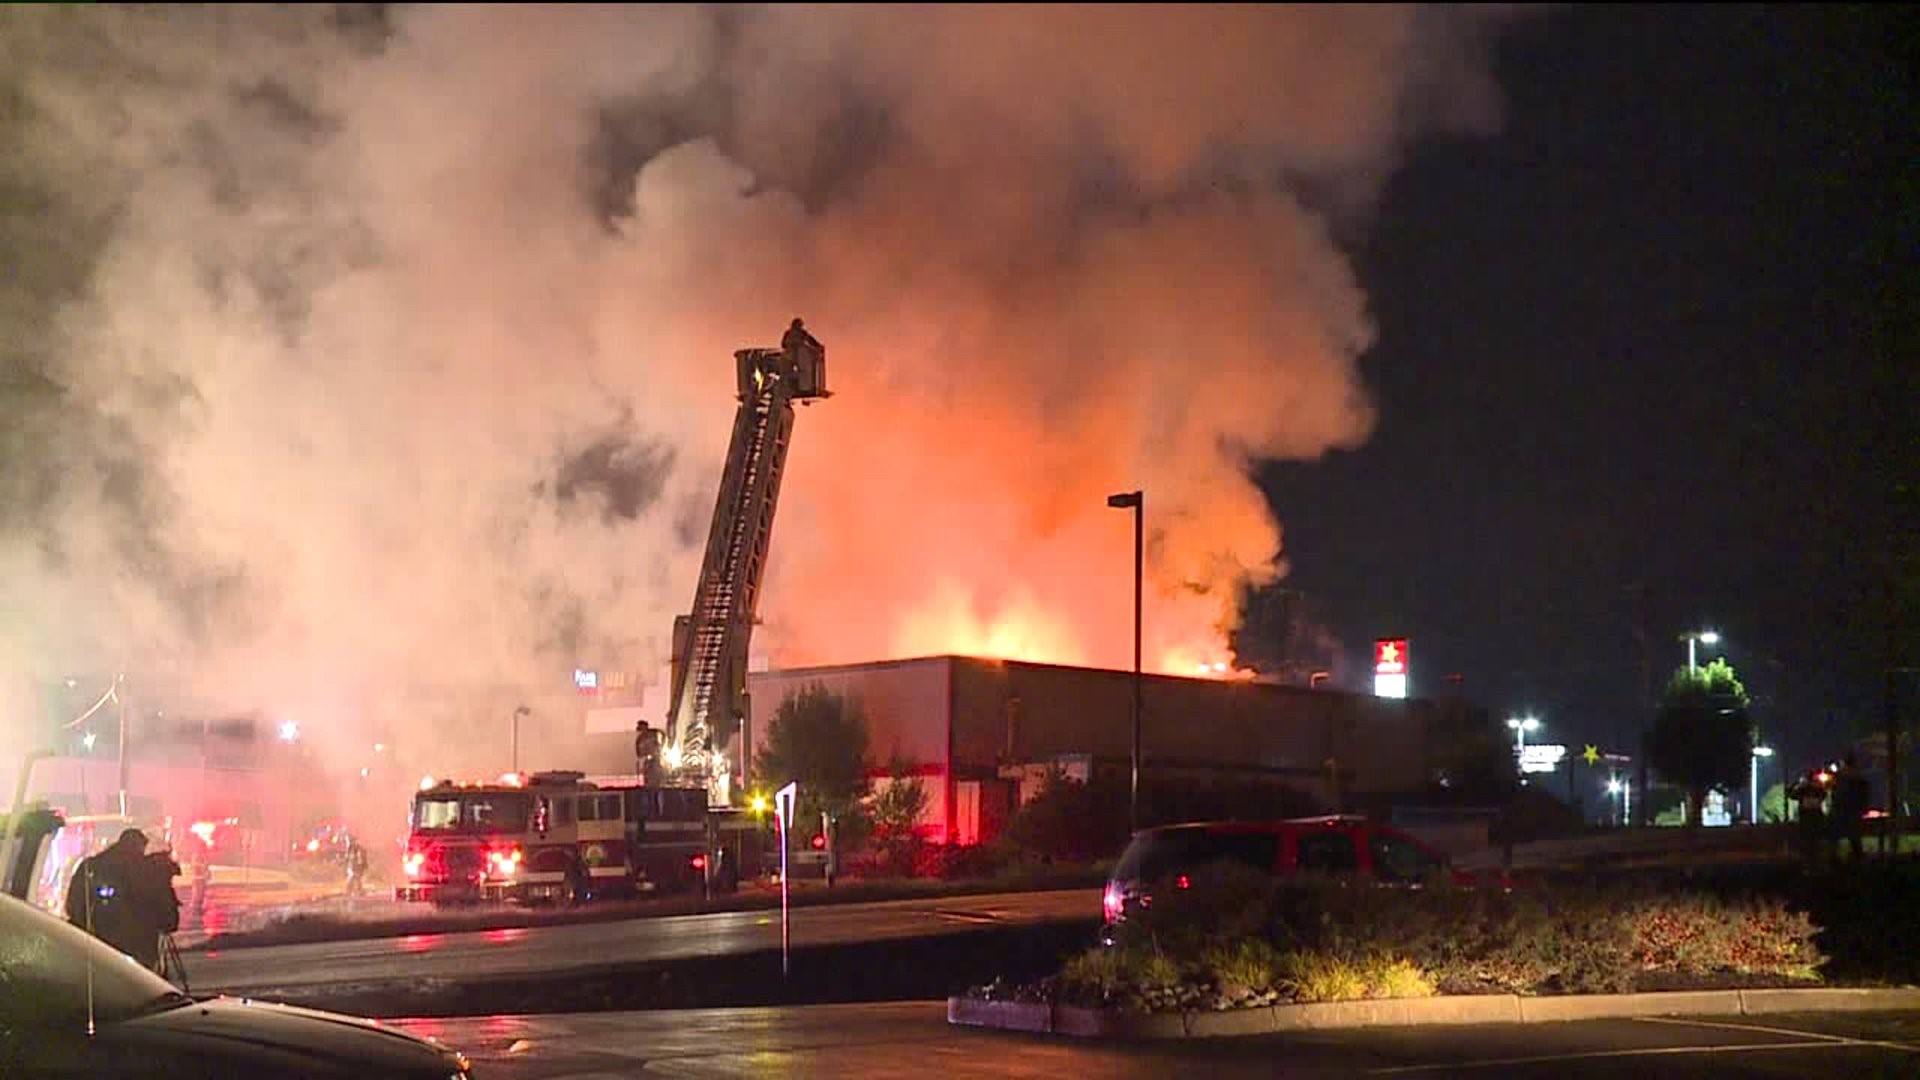 Restaurant Destroyed by Fire in Wilkes-Barre